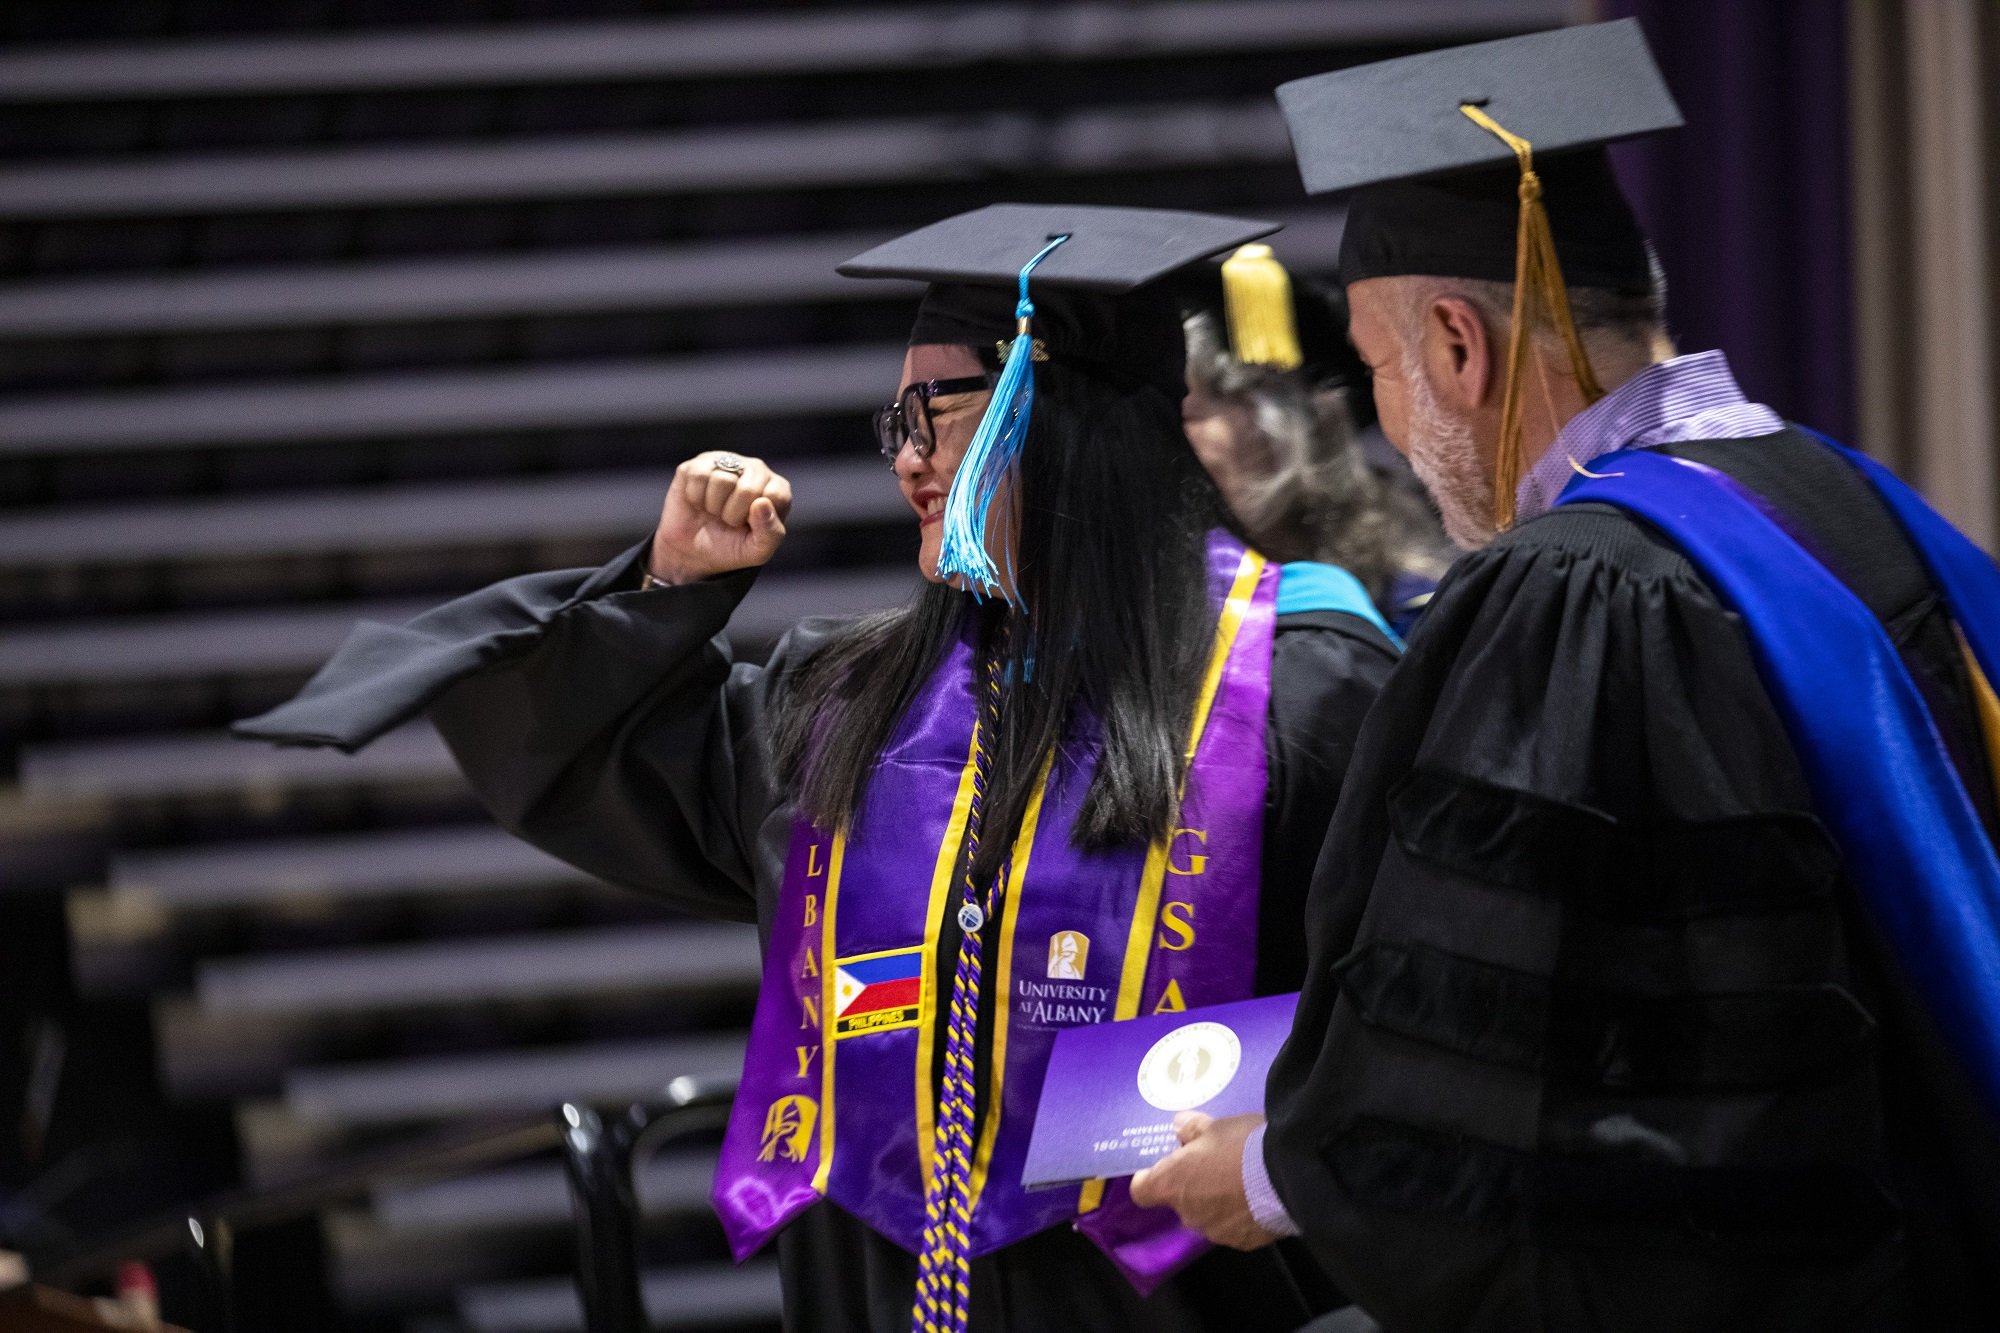 A UAlbany master's graduate pumps her fist as she walks across the stage.